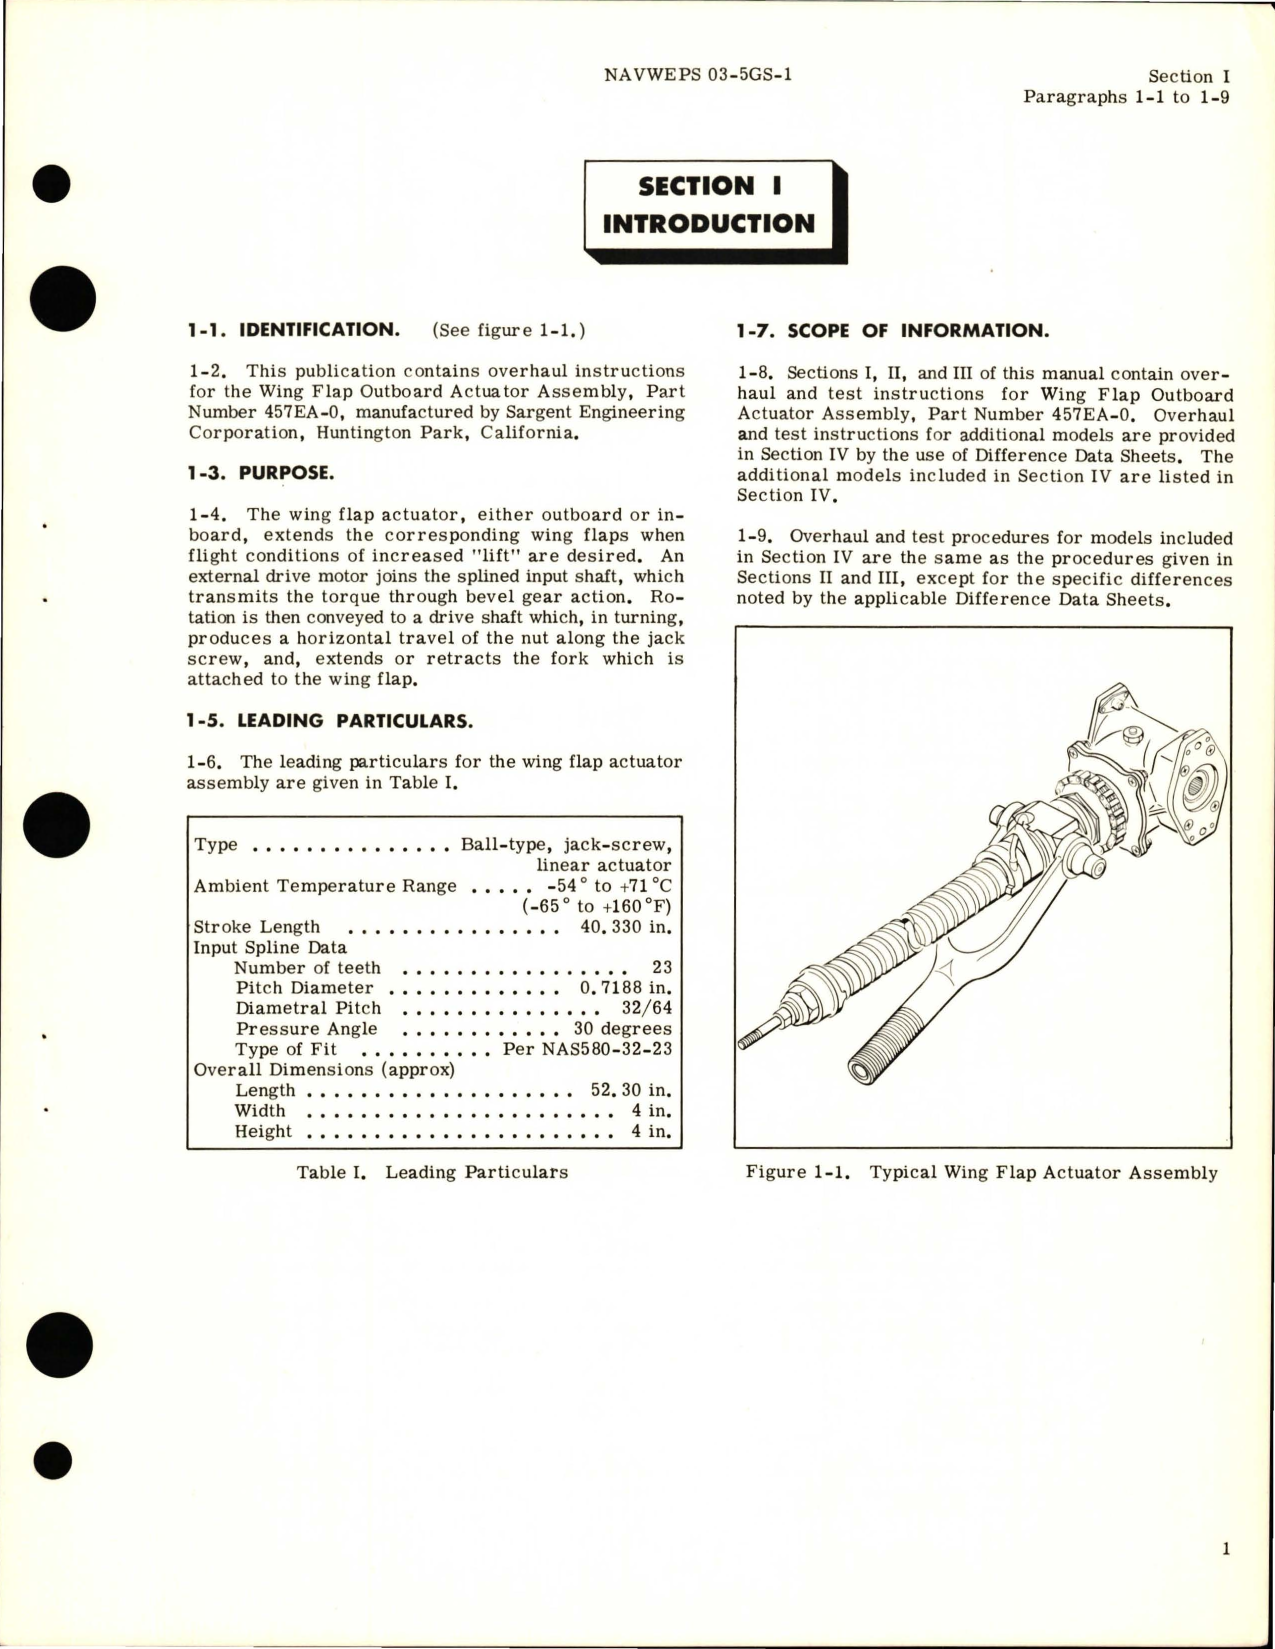 Sample page 5 from AirCorps Library document: Overhaul Instructions for Wing Flap Actuator Assembly - Parts 457EA-0 and 457EA-1